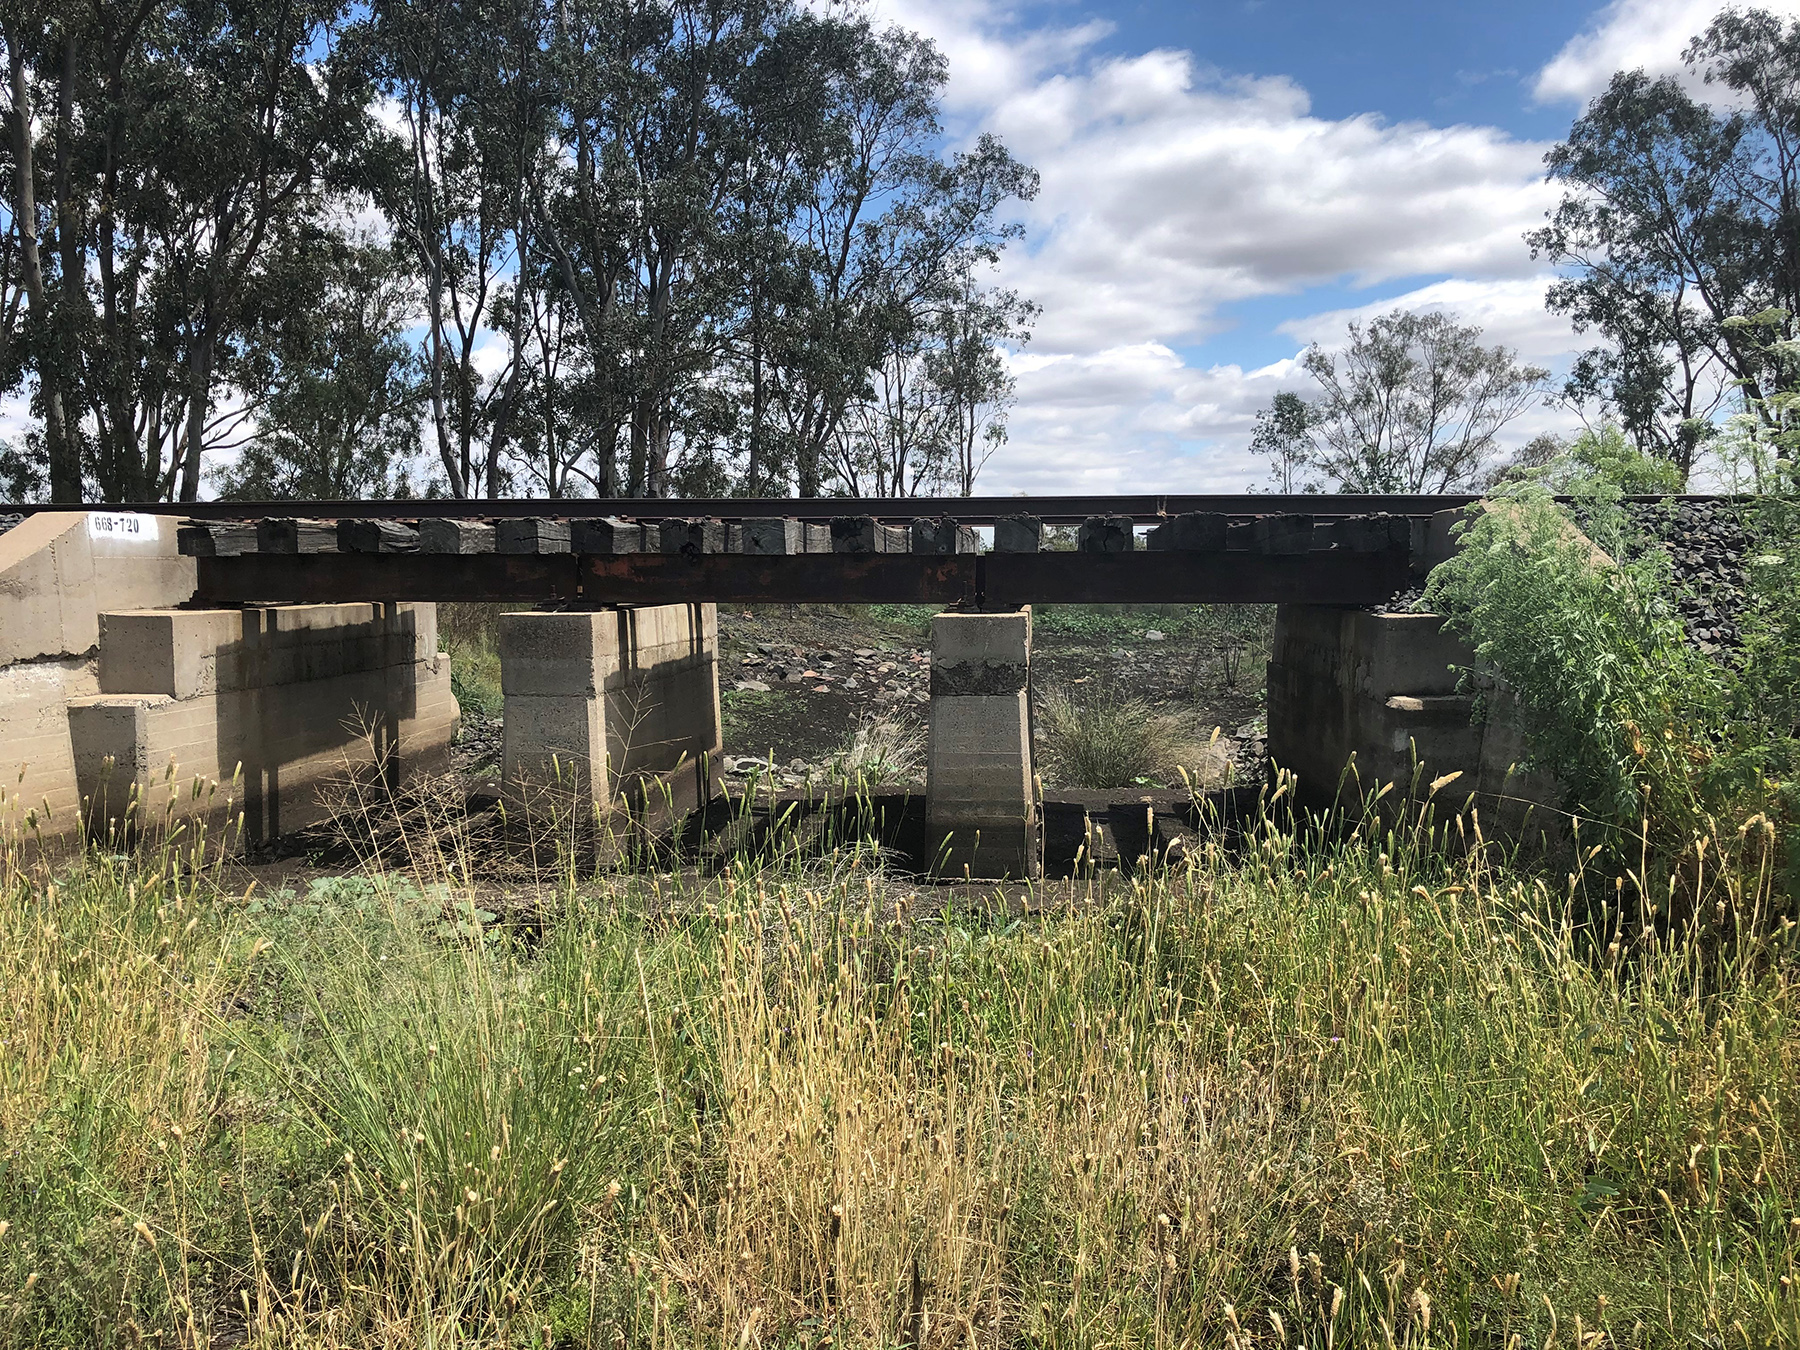 Rail Bridge running over a dry river bed